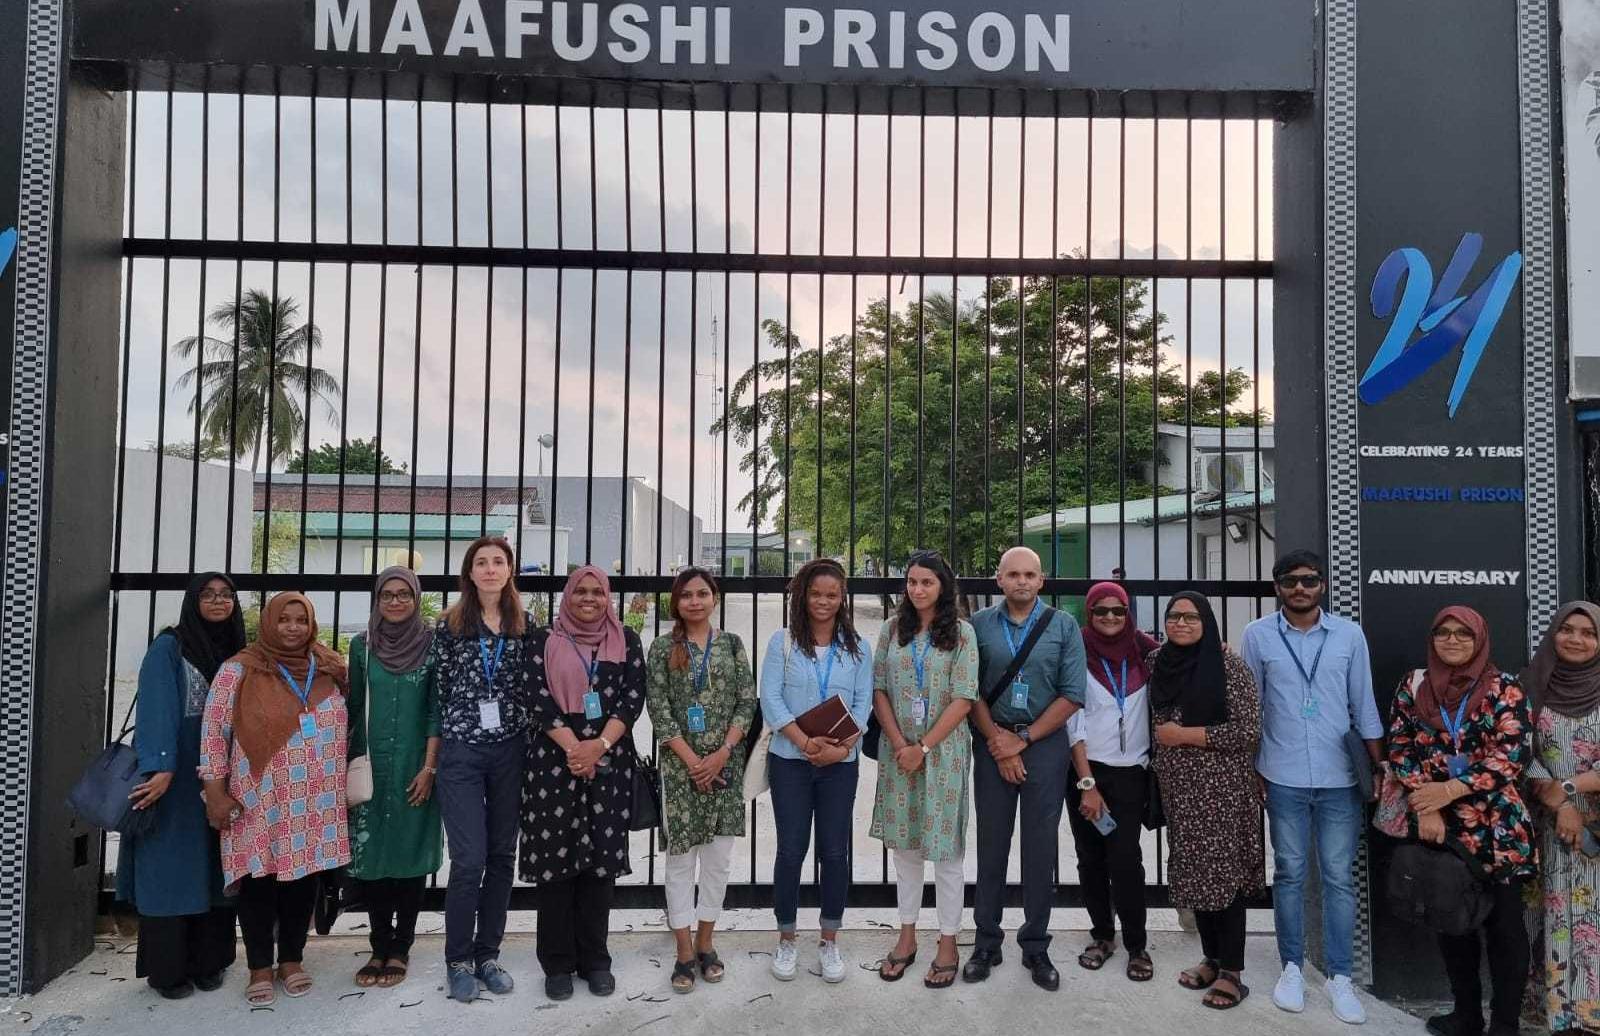 APT and Human Rights Commission team pose in front of prison gate